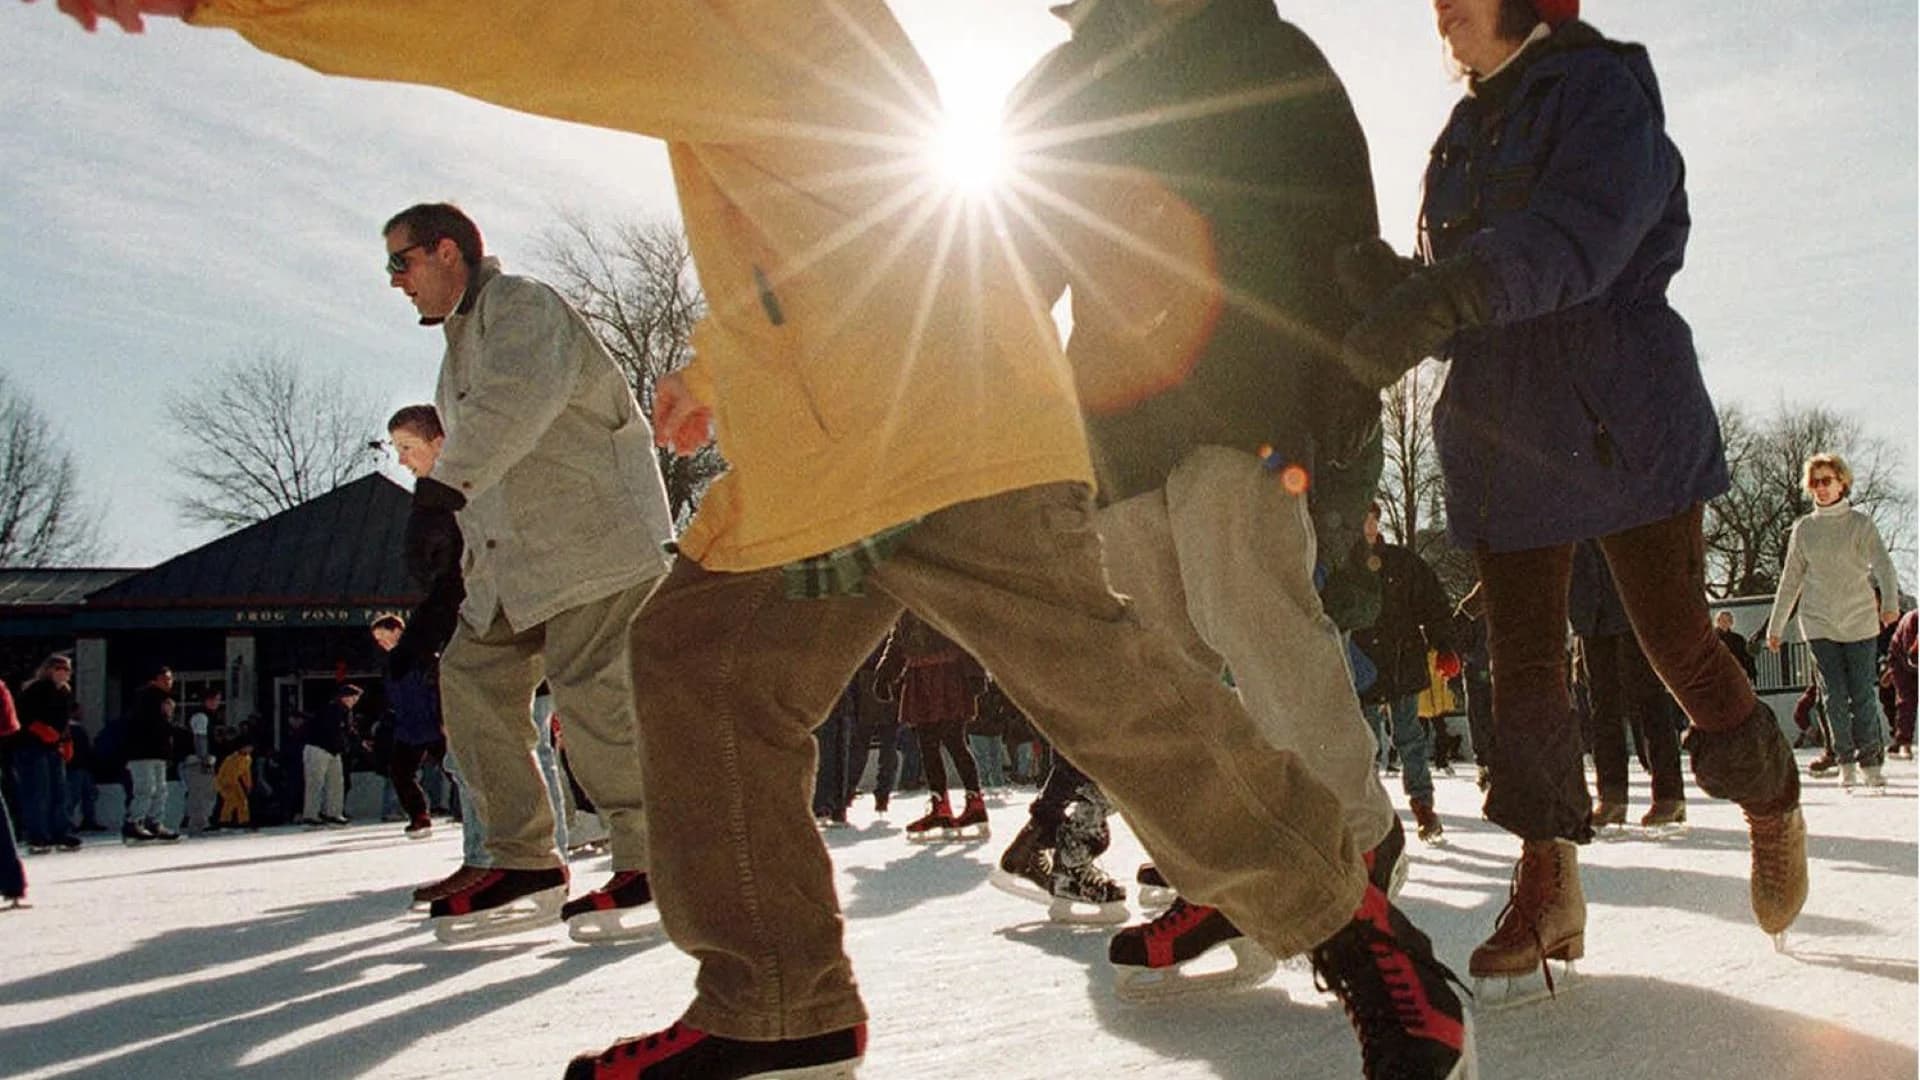 Guide: Ice skating rinks in Connecticut